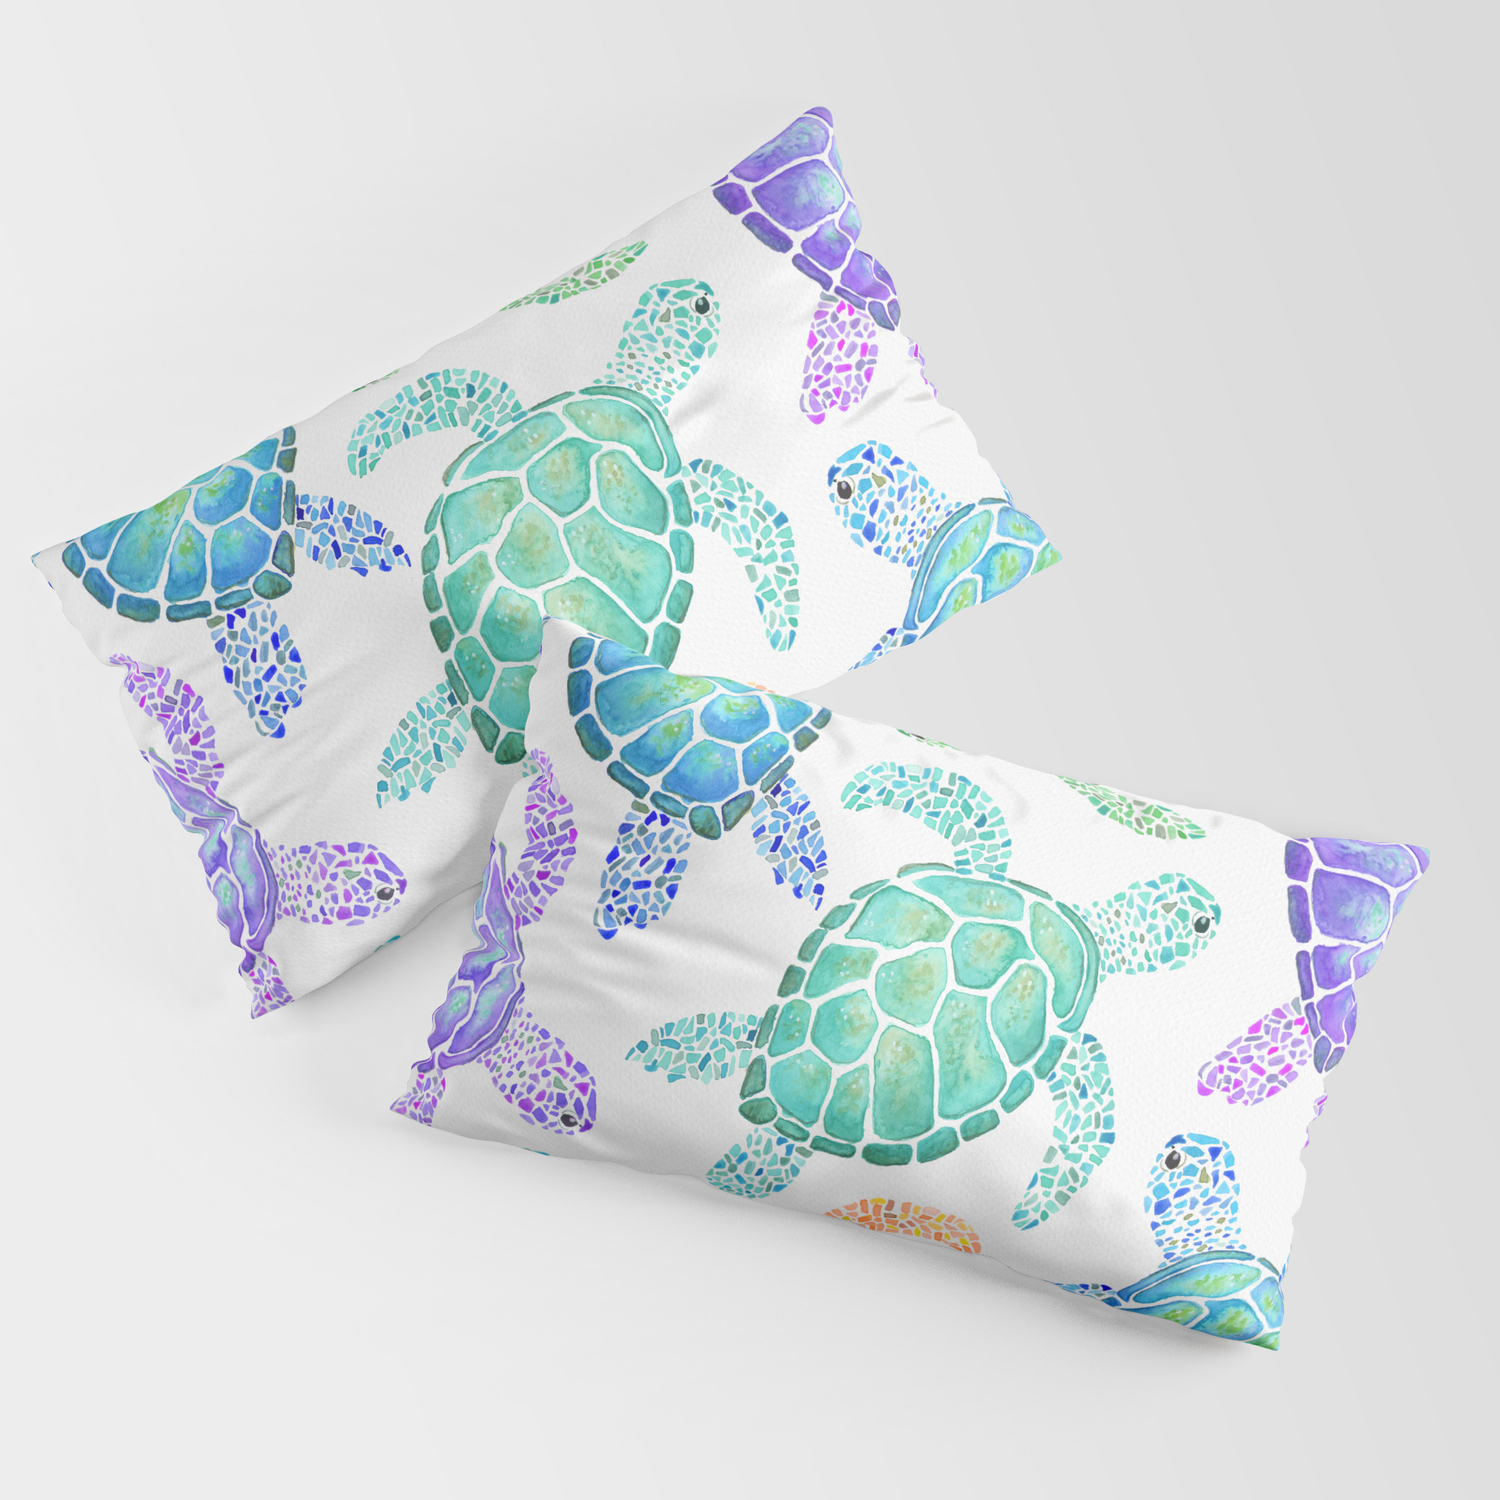 Colour by Ellen Shaw on Throw Pillow Sea Turtle 